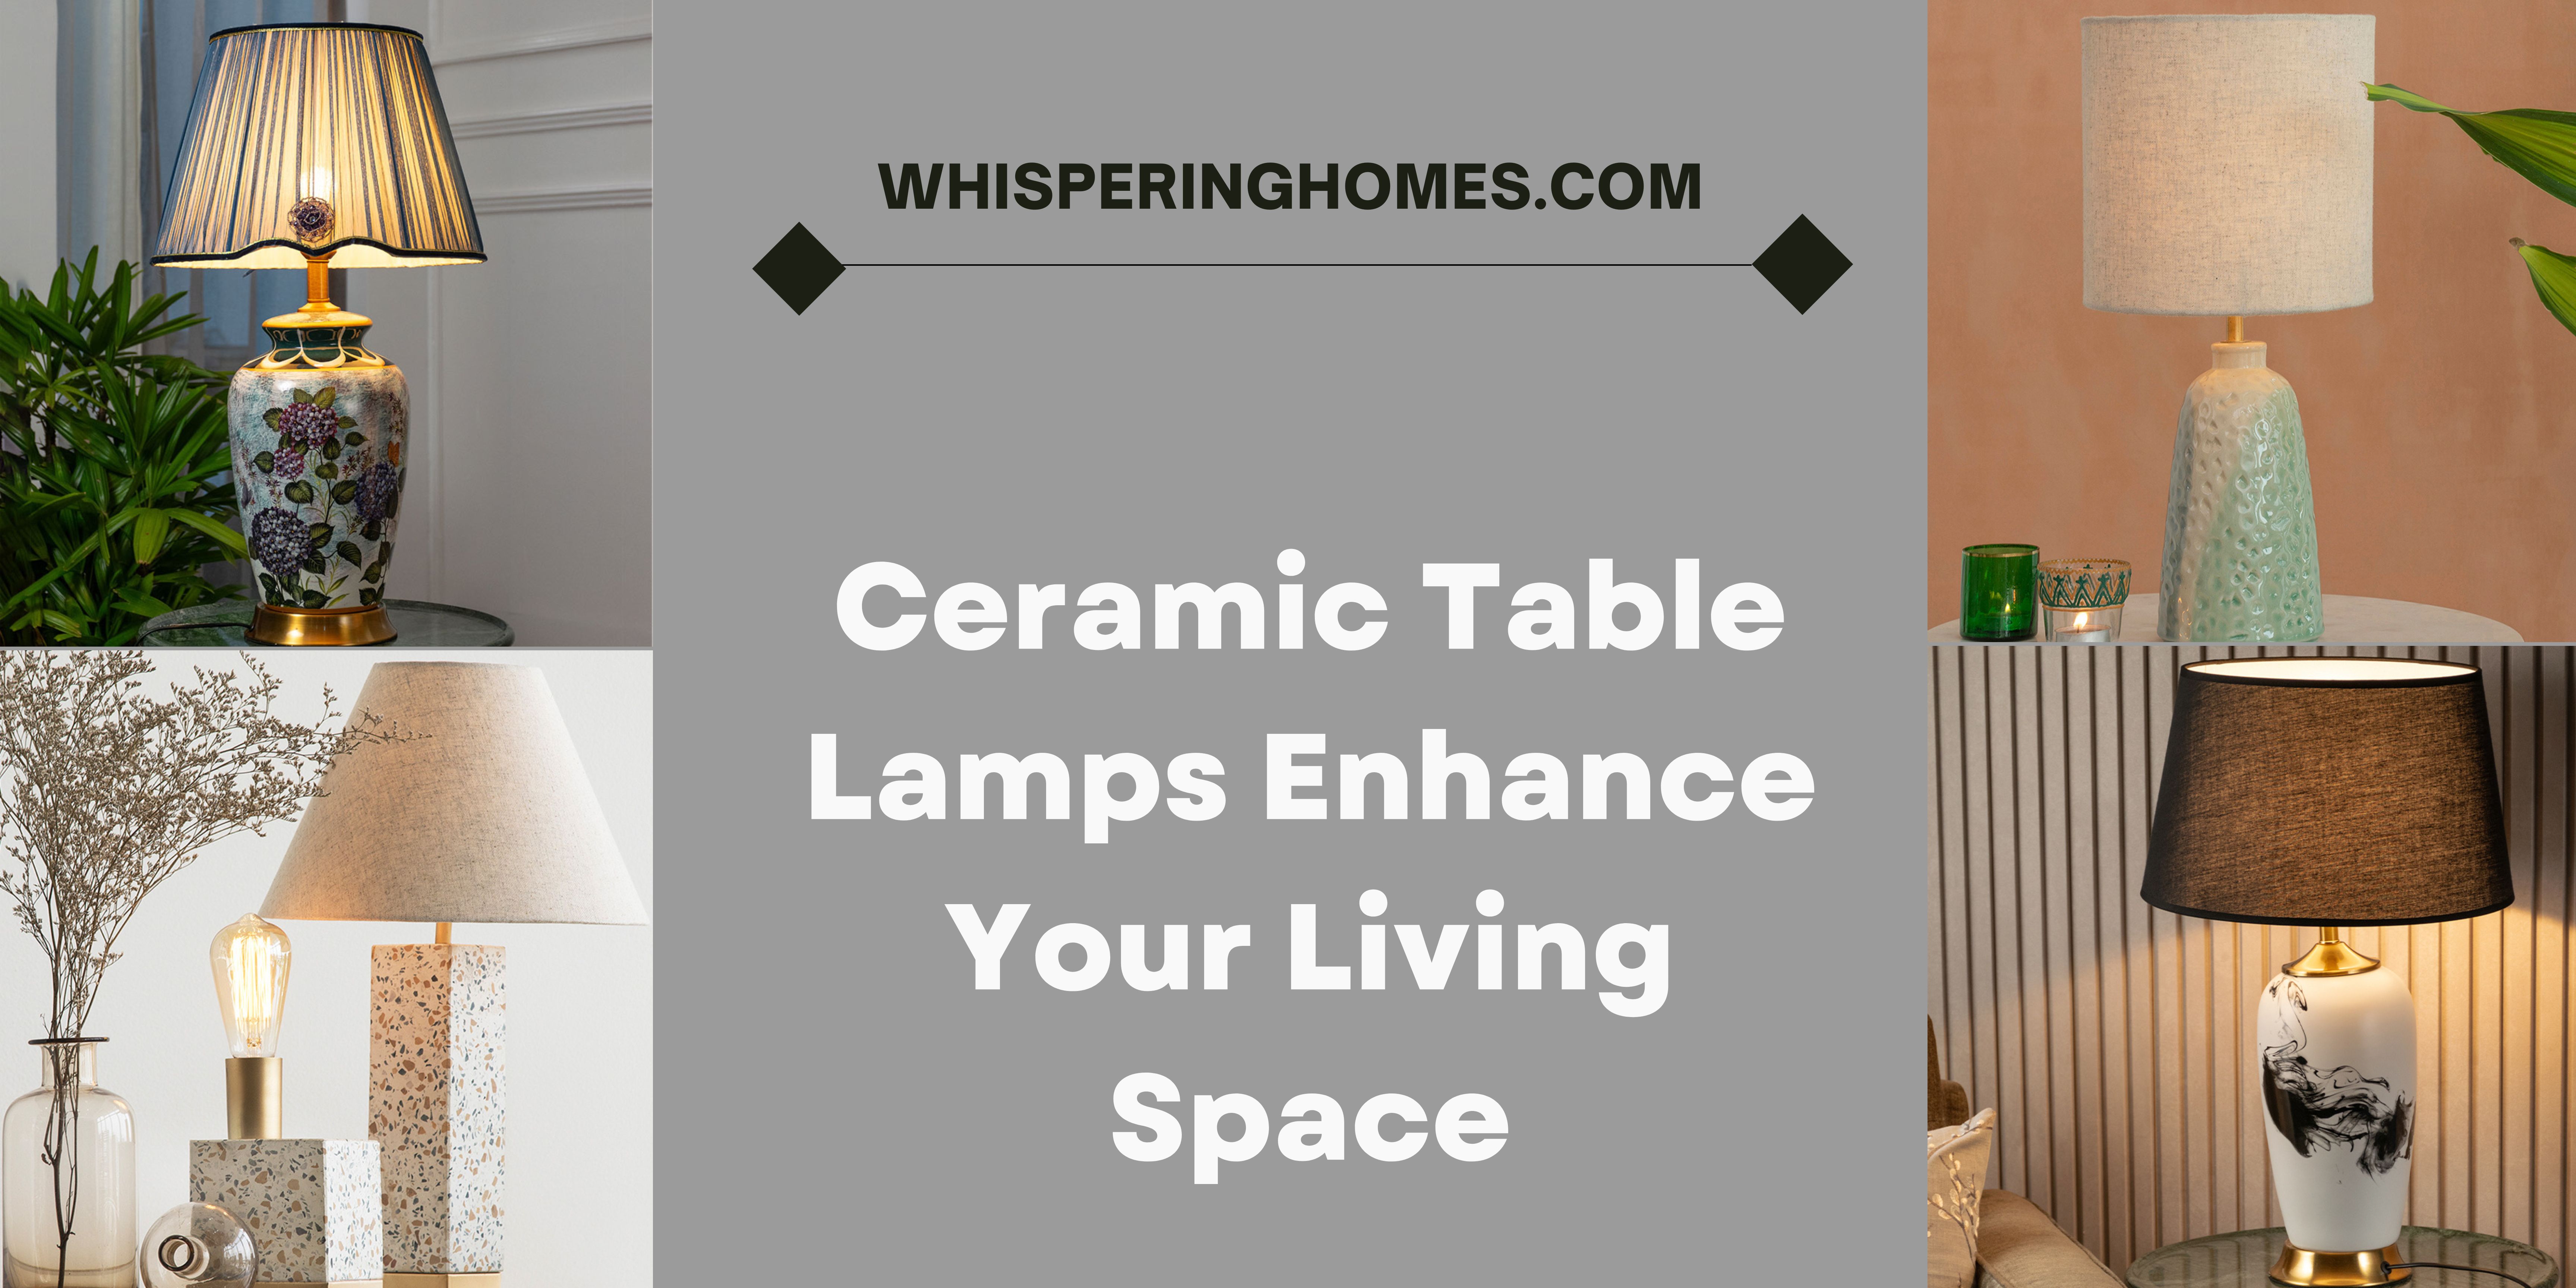 A Bright Idea: How Ceramic Table Lamps Enhance Your Living Space